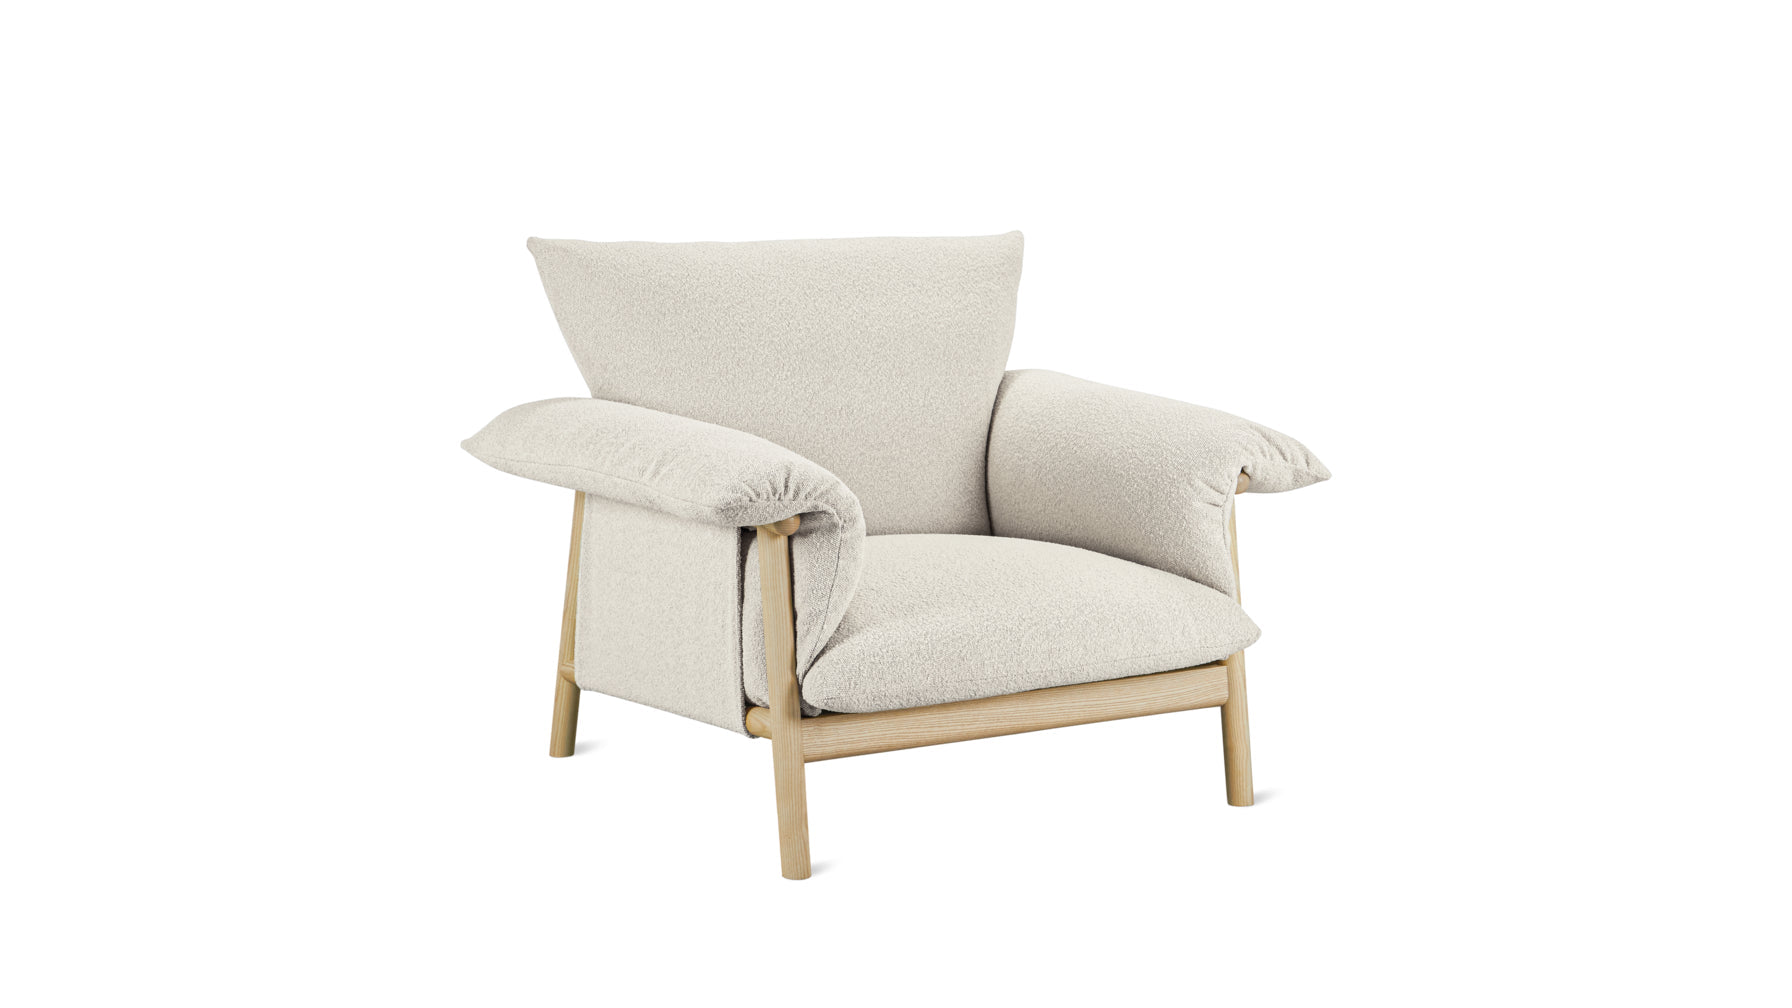 Pillow Talk Lounge Chair, Warm Frost - Image 1